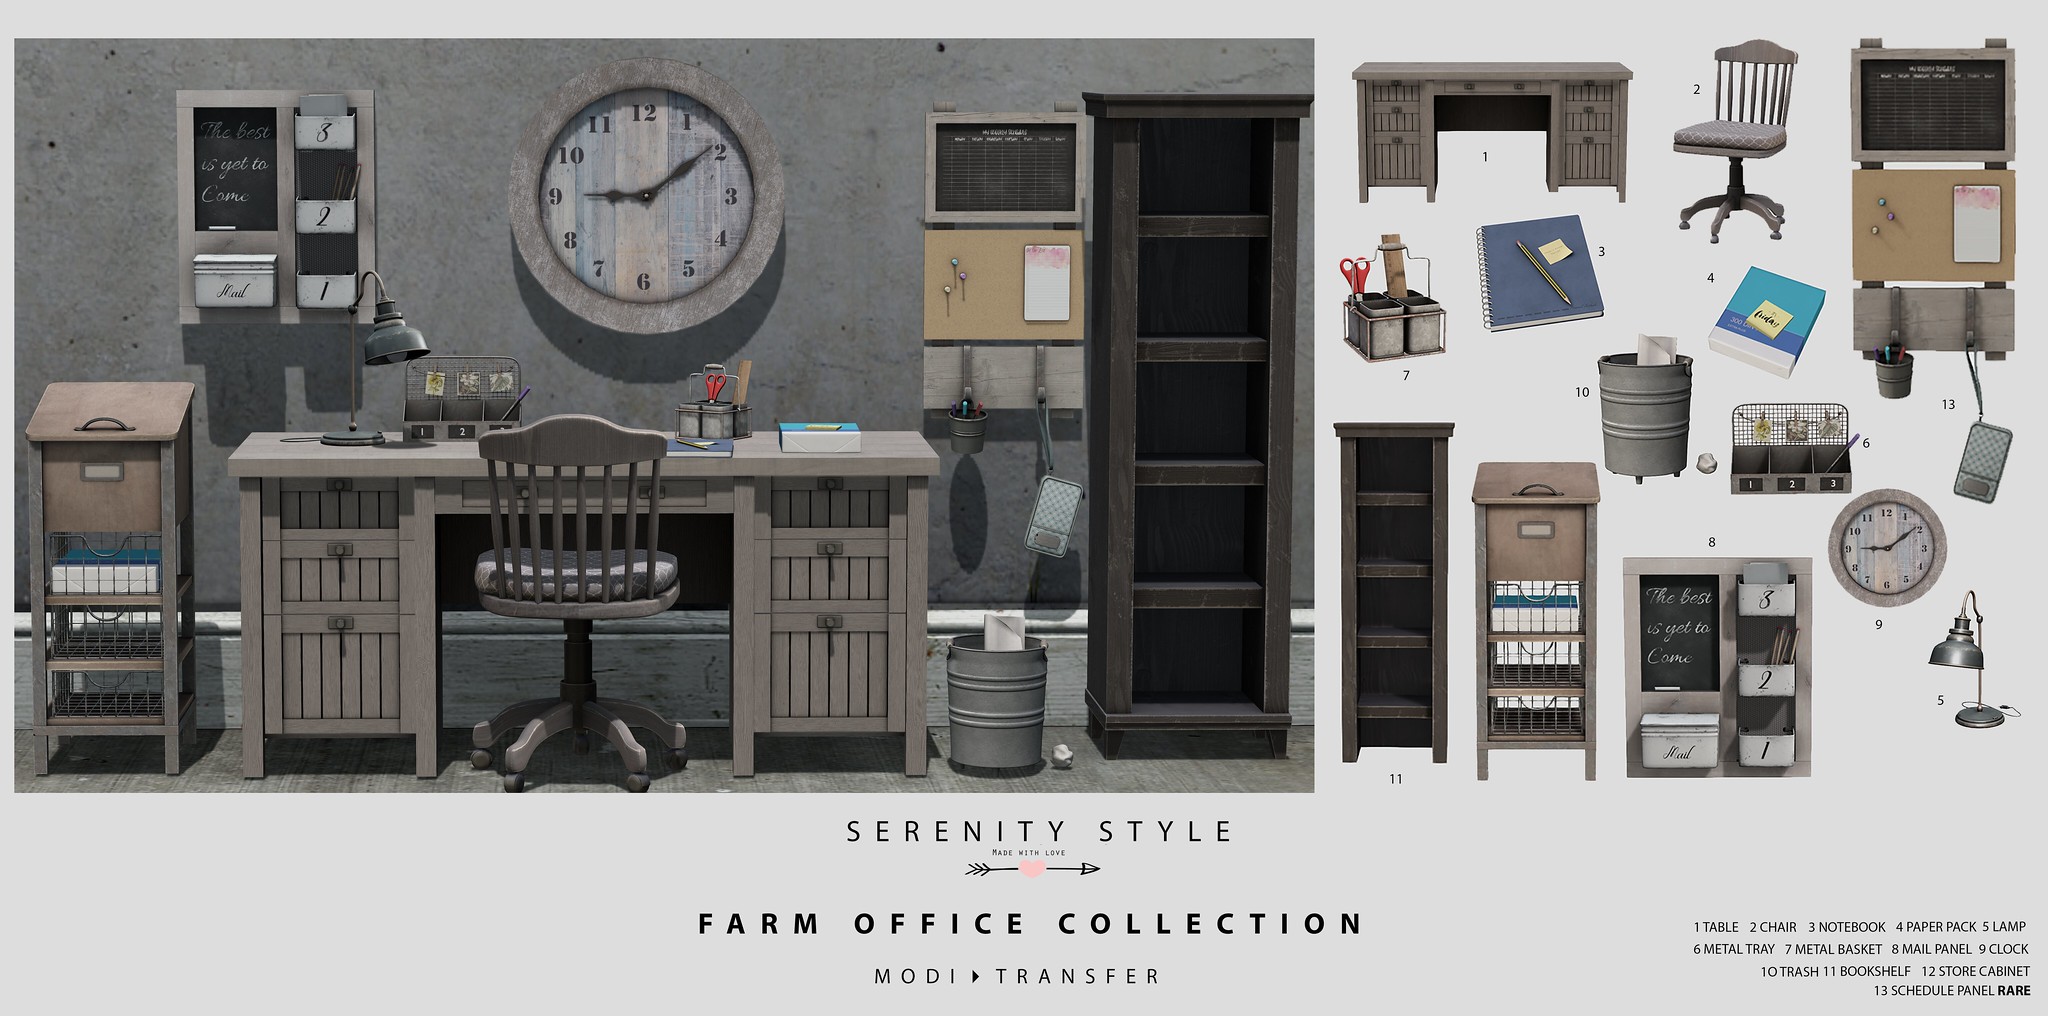 Serenity Style – Farm Office Collection